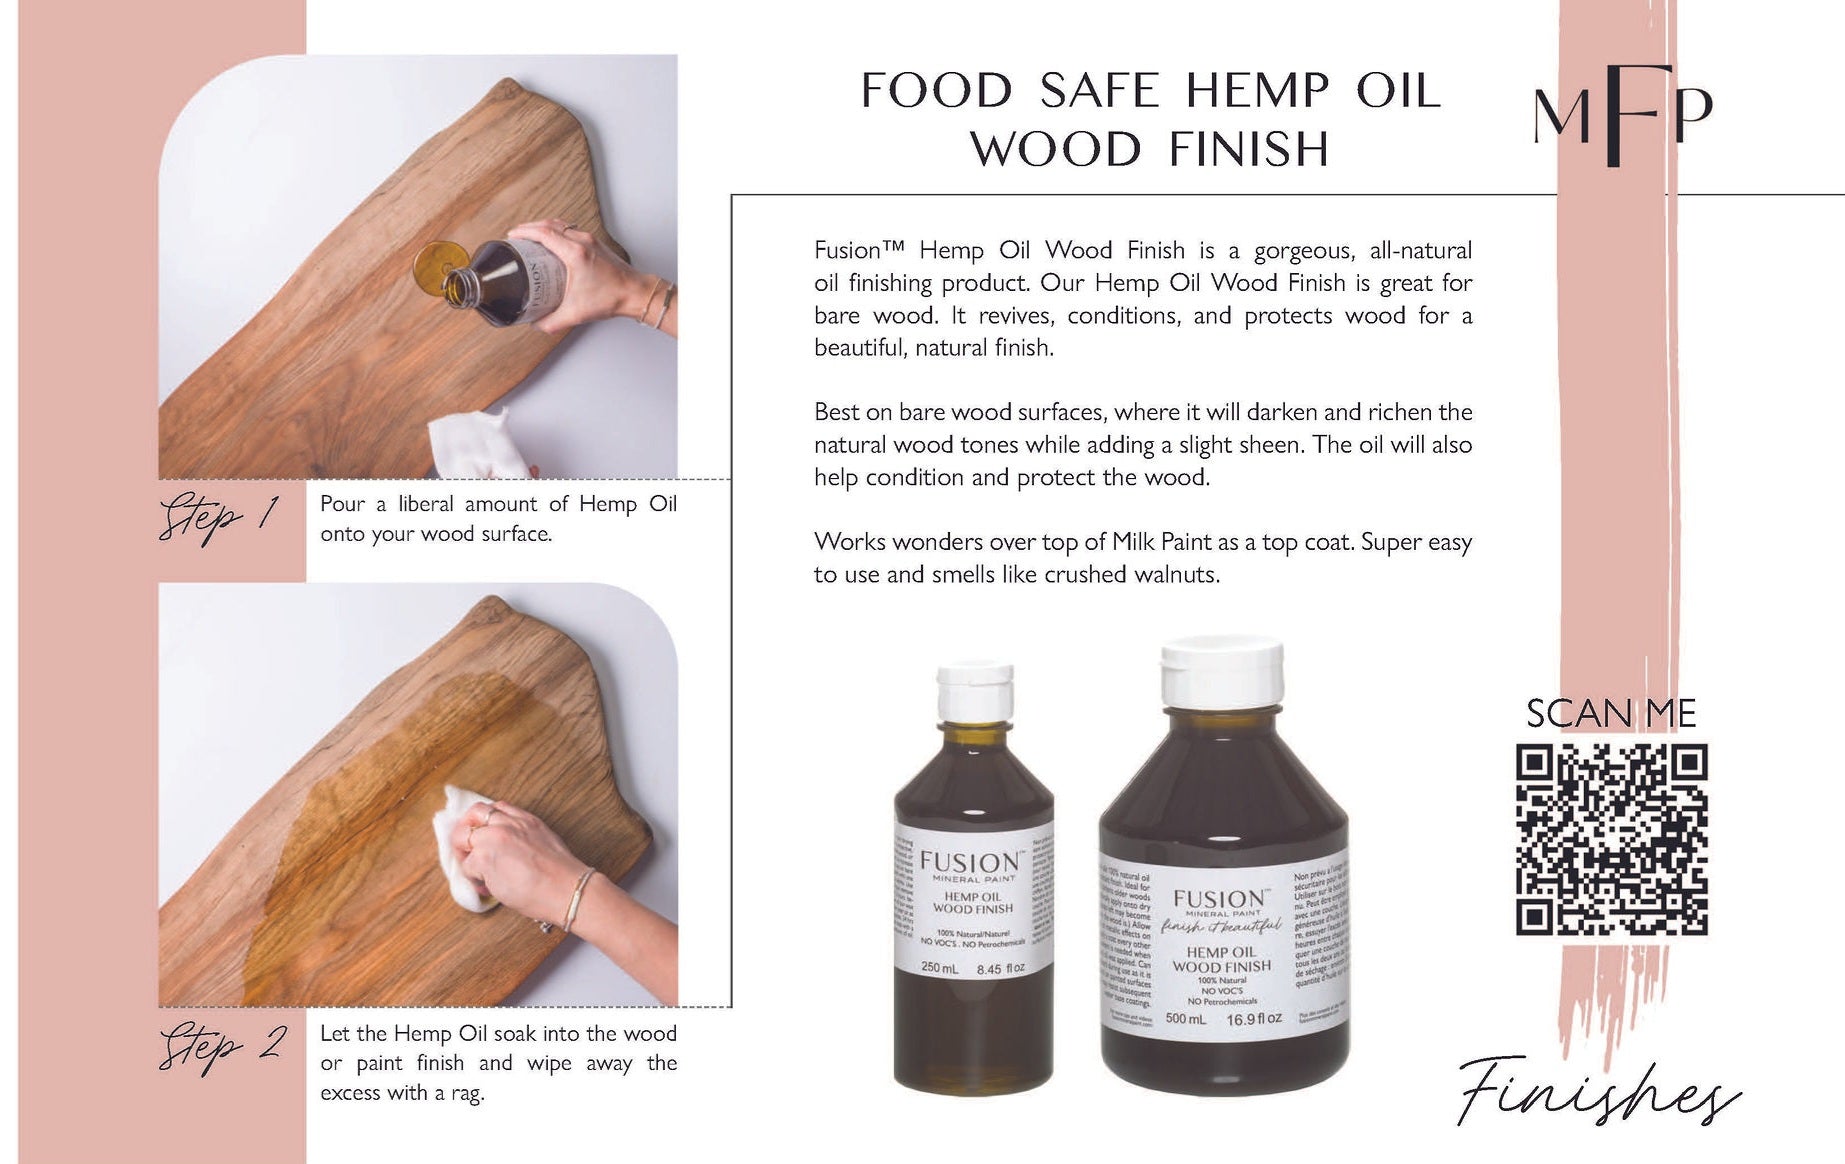 How to use fusion hemp oil to treat wood to a foodsafe finish